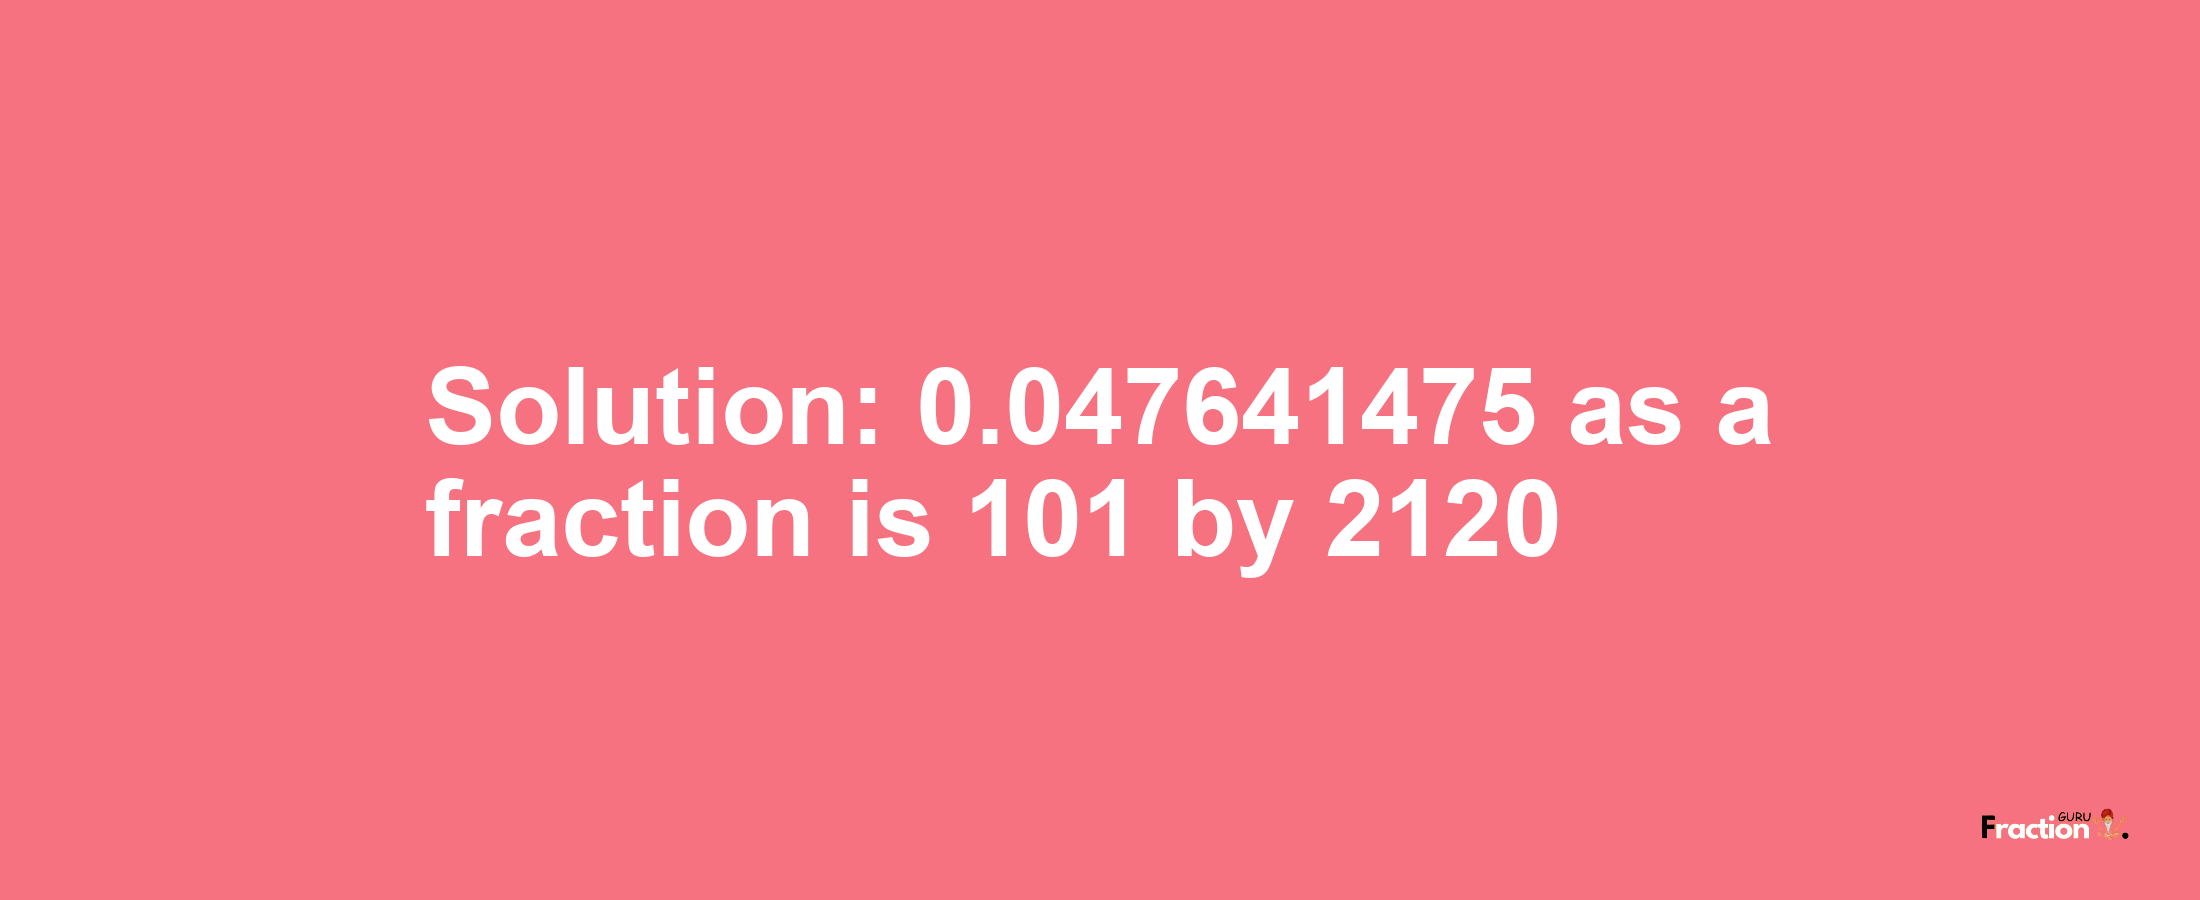 Solution:0.047641475 as a fraction is 101/2120